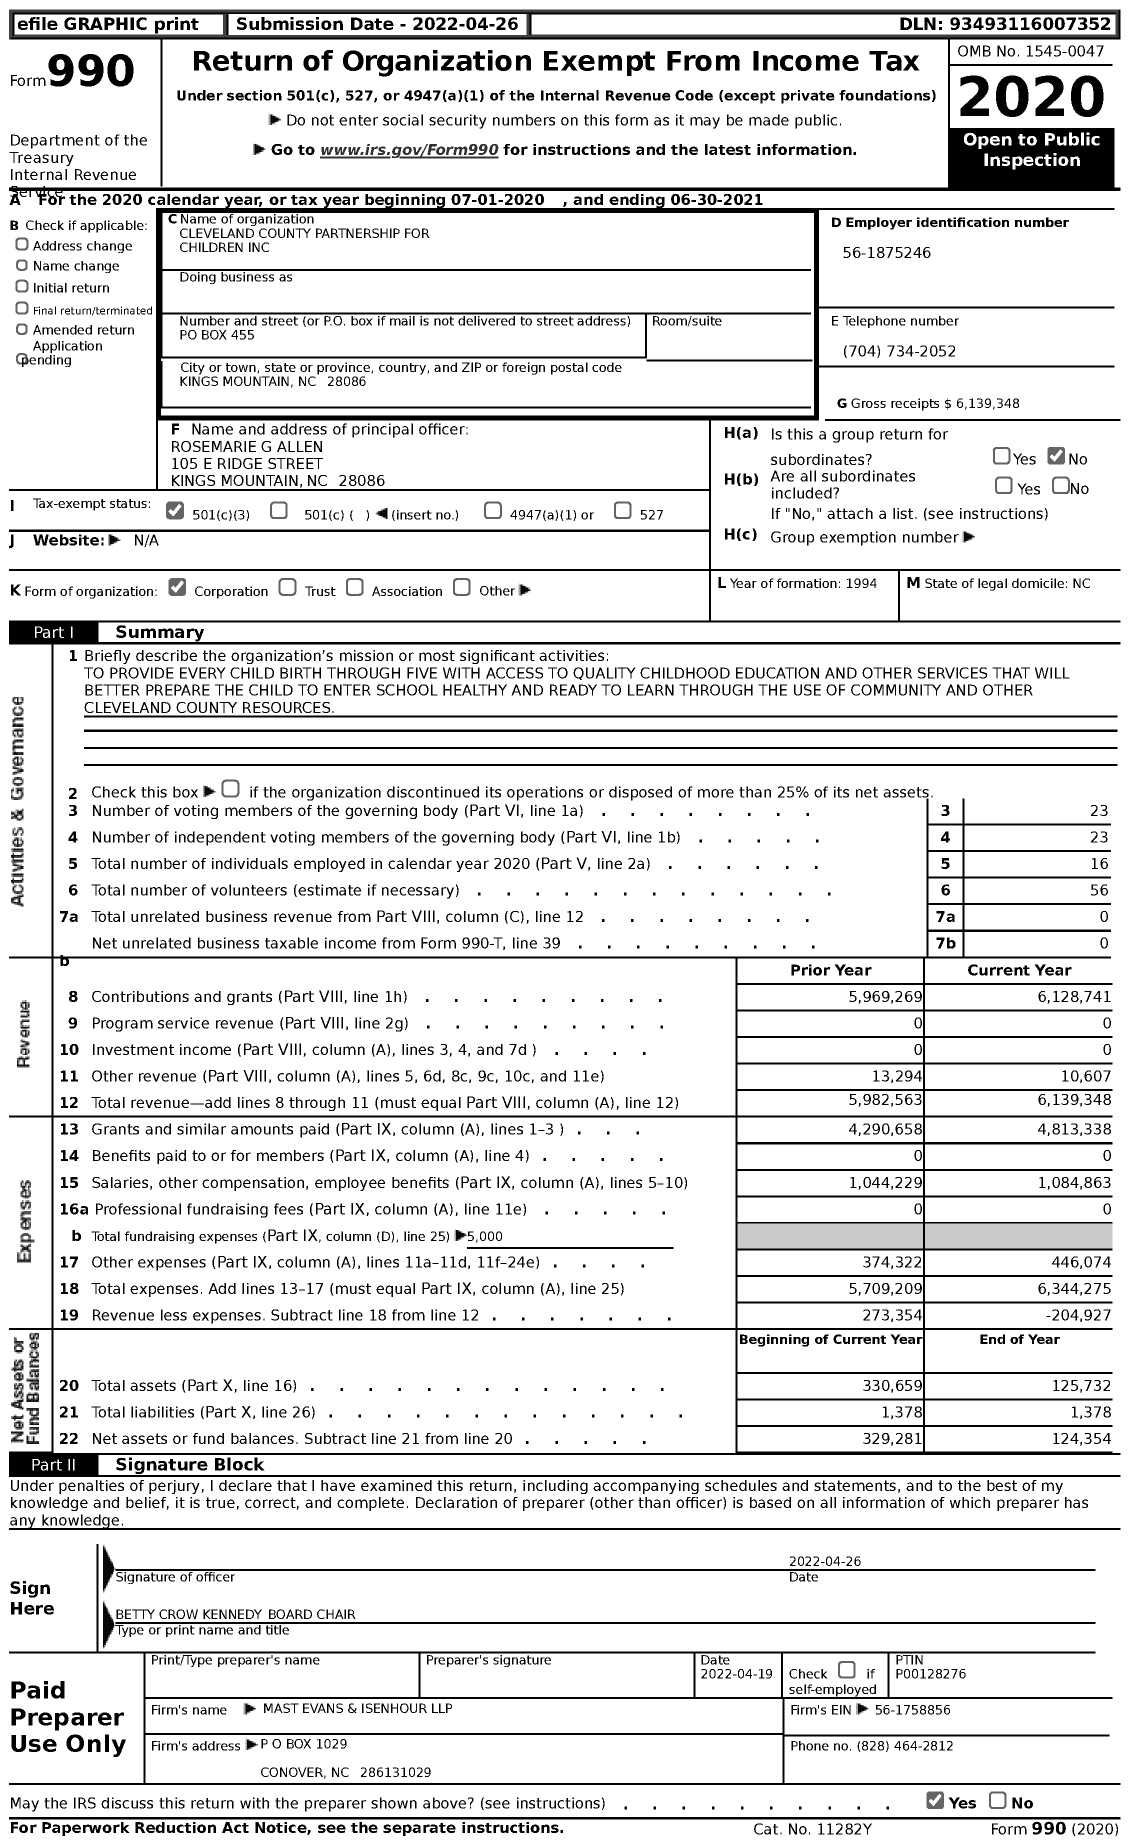 Image of first page of 2020 Form 990 for Cleveland County Partnership for Children